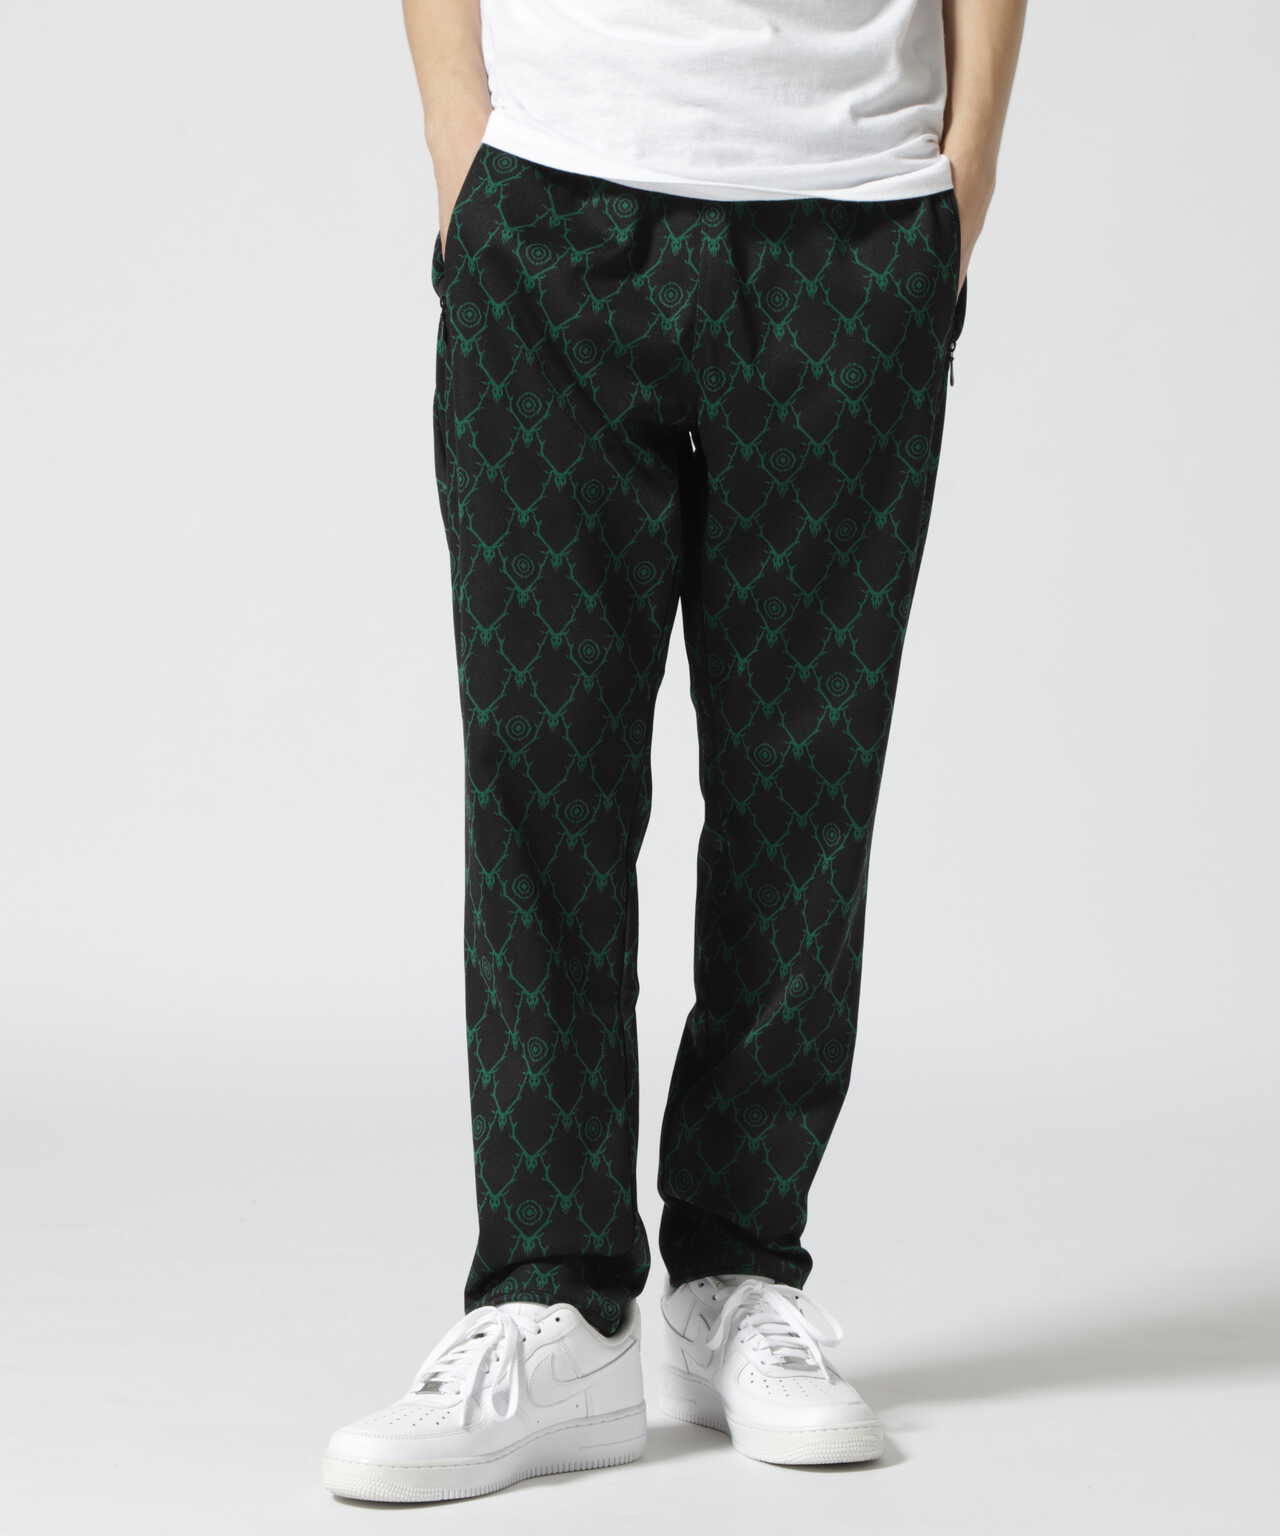 SOUTH2 WEST8/サウスツーウエストエイト TRAINER PANT - POLY JQ 